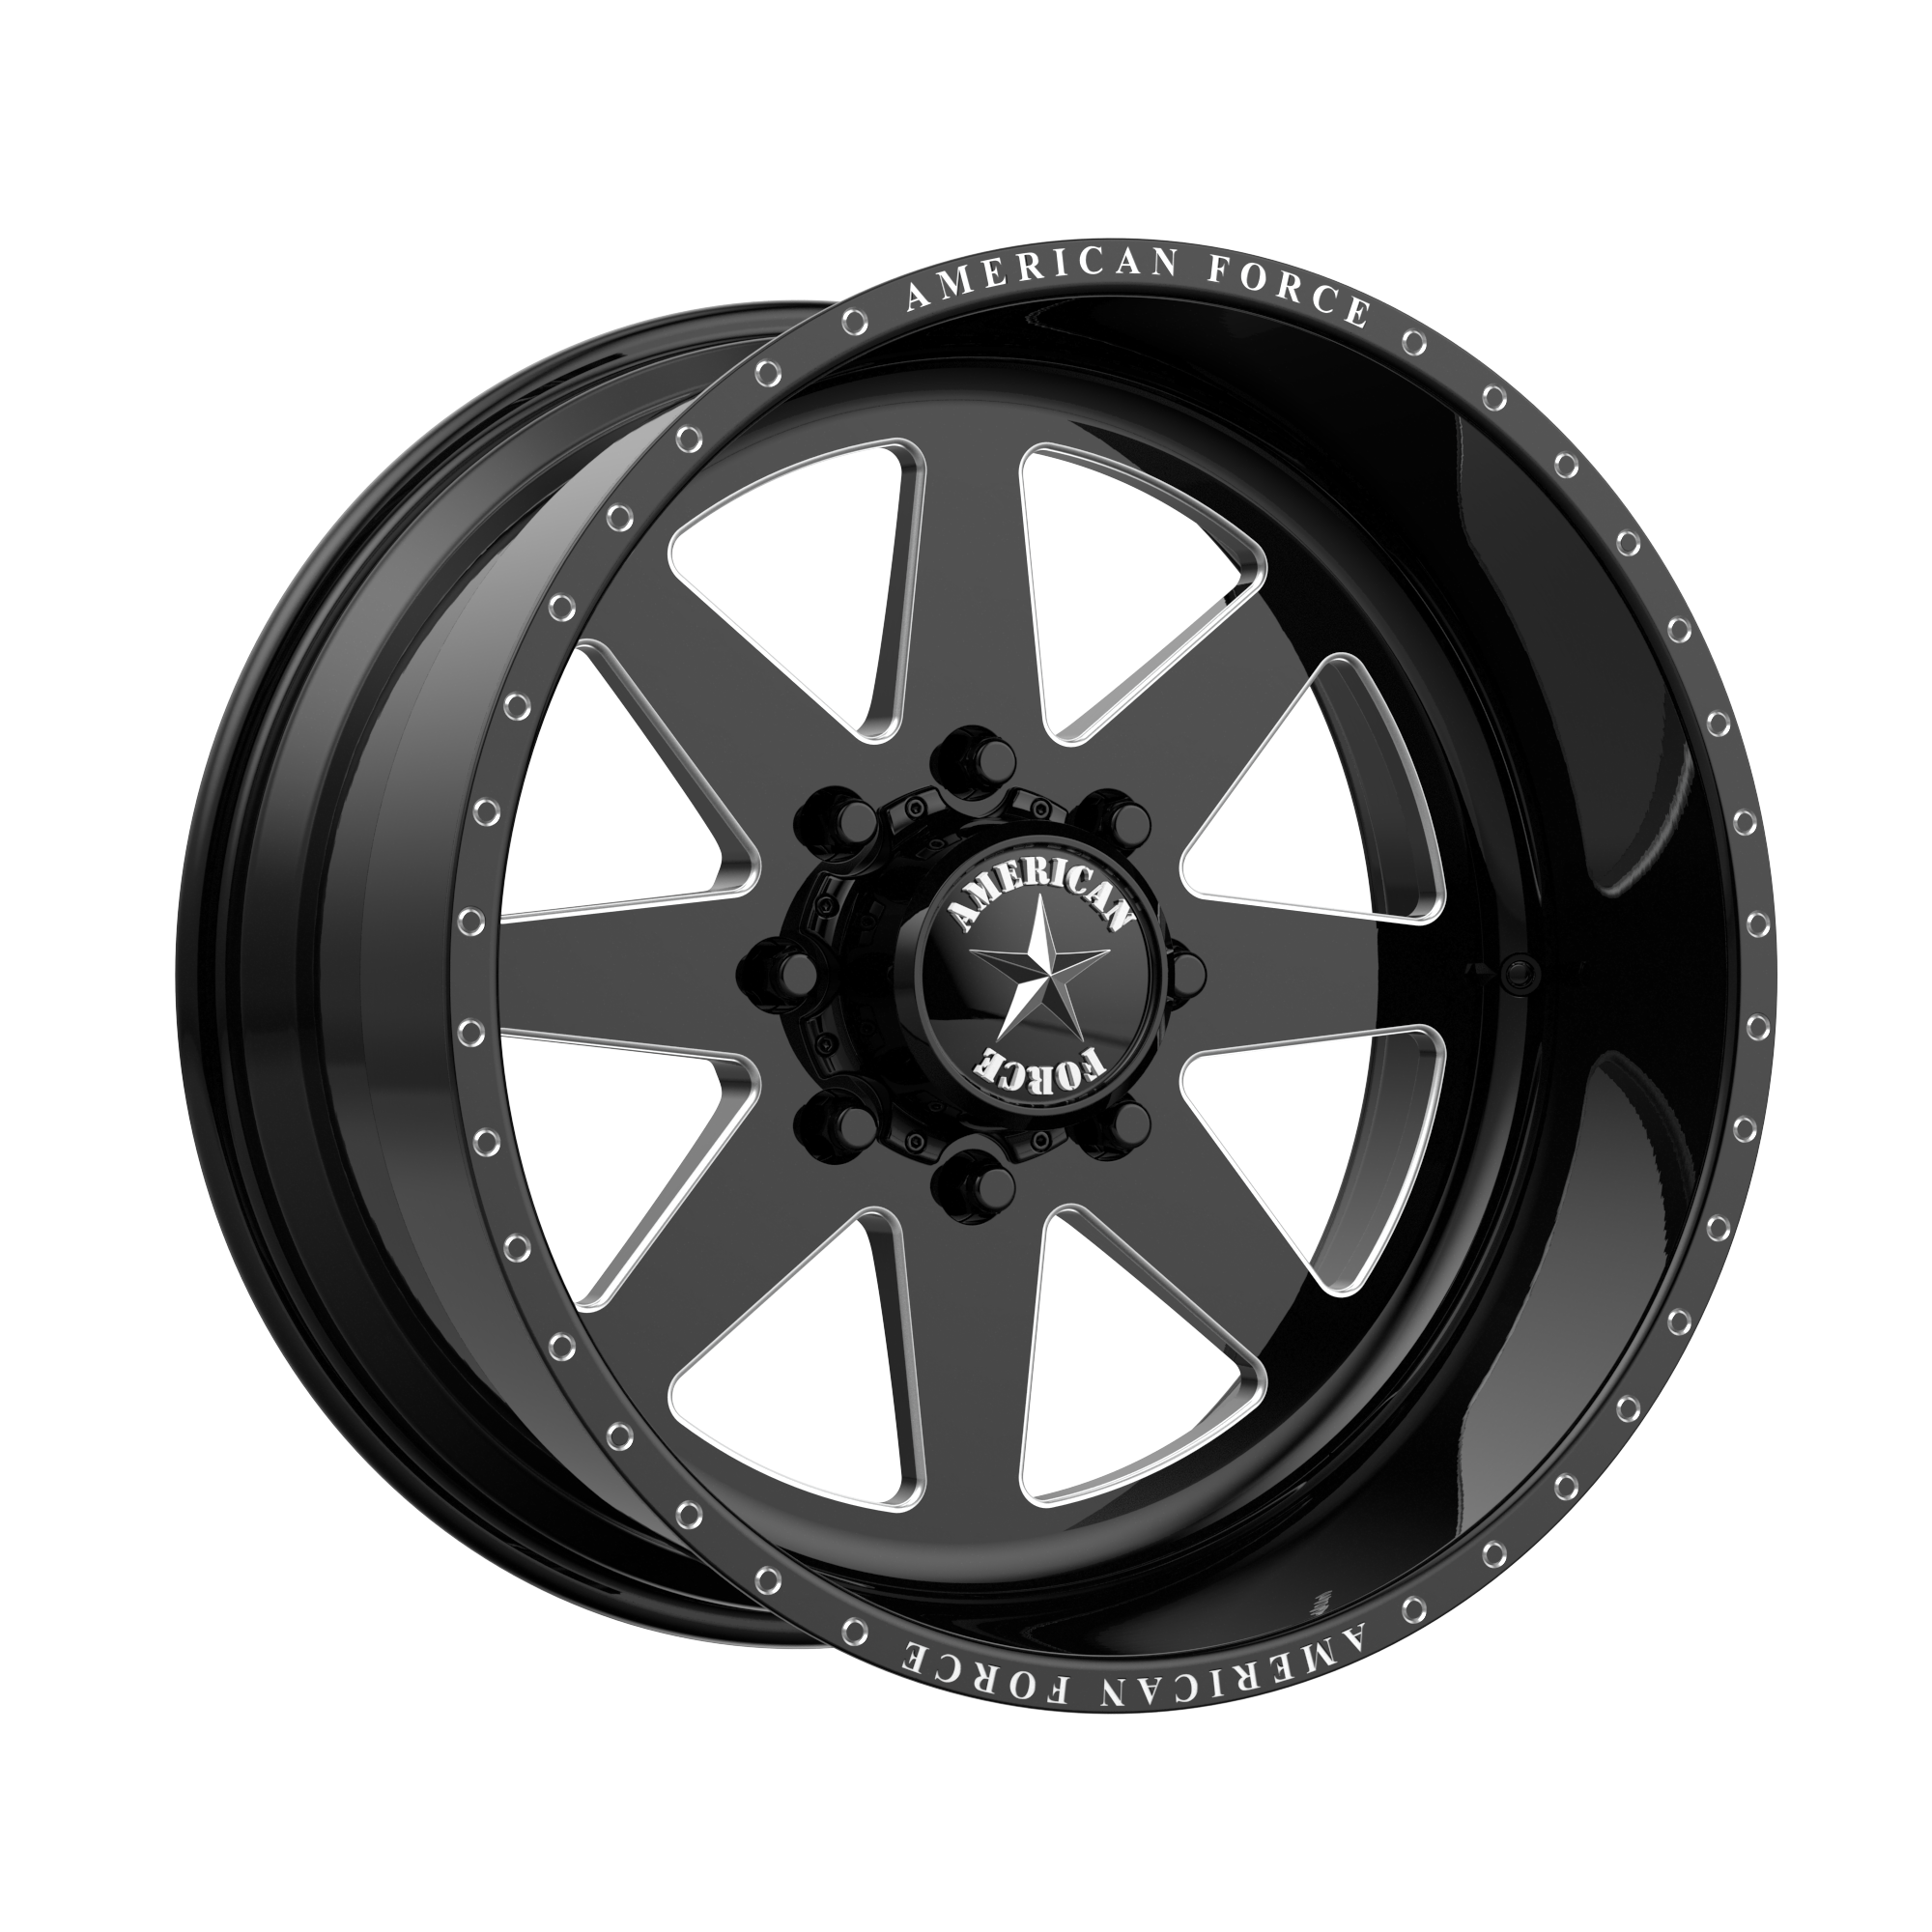 INDEPENDENCE SS 24x14 8x180.00 GLOSS BLACK MACHINED (-73 mm) - Tires and Engine Performance